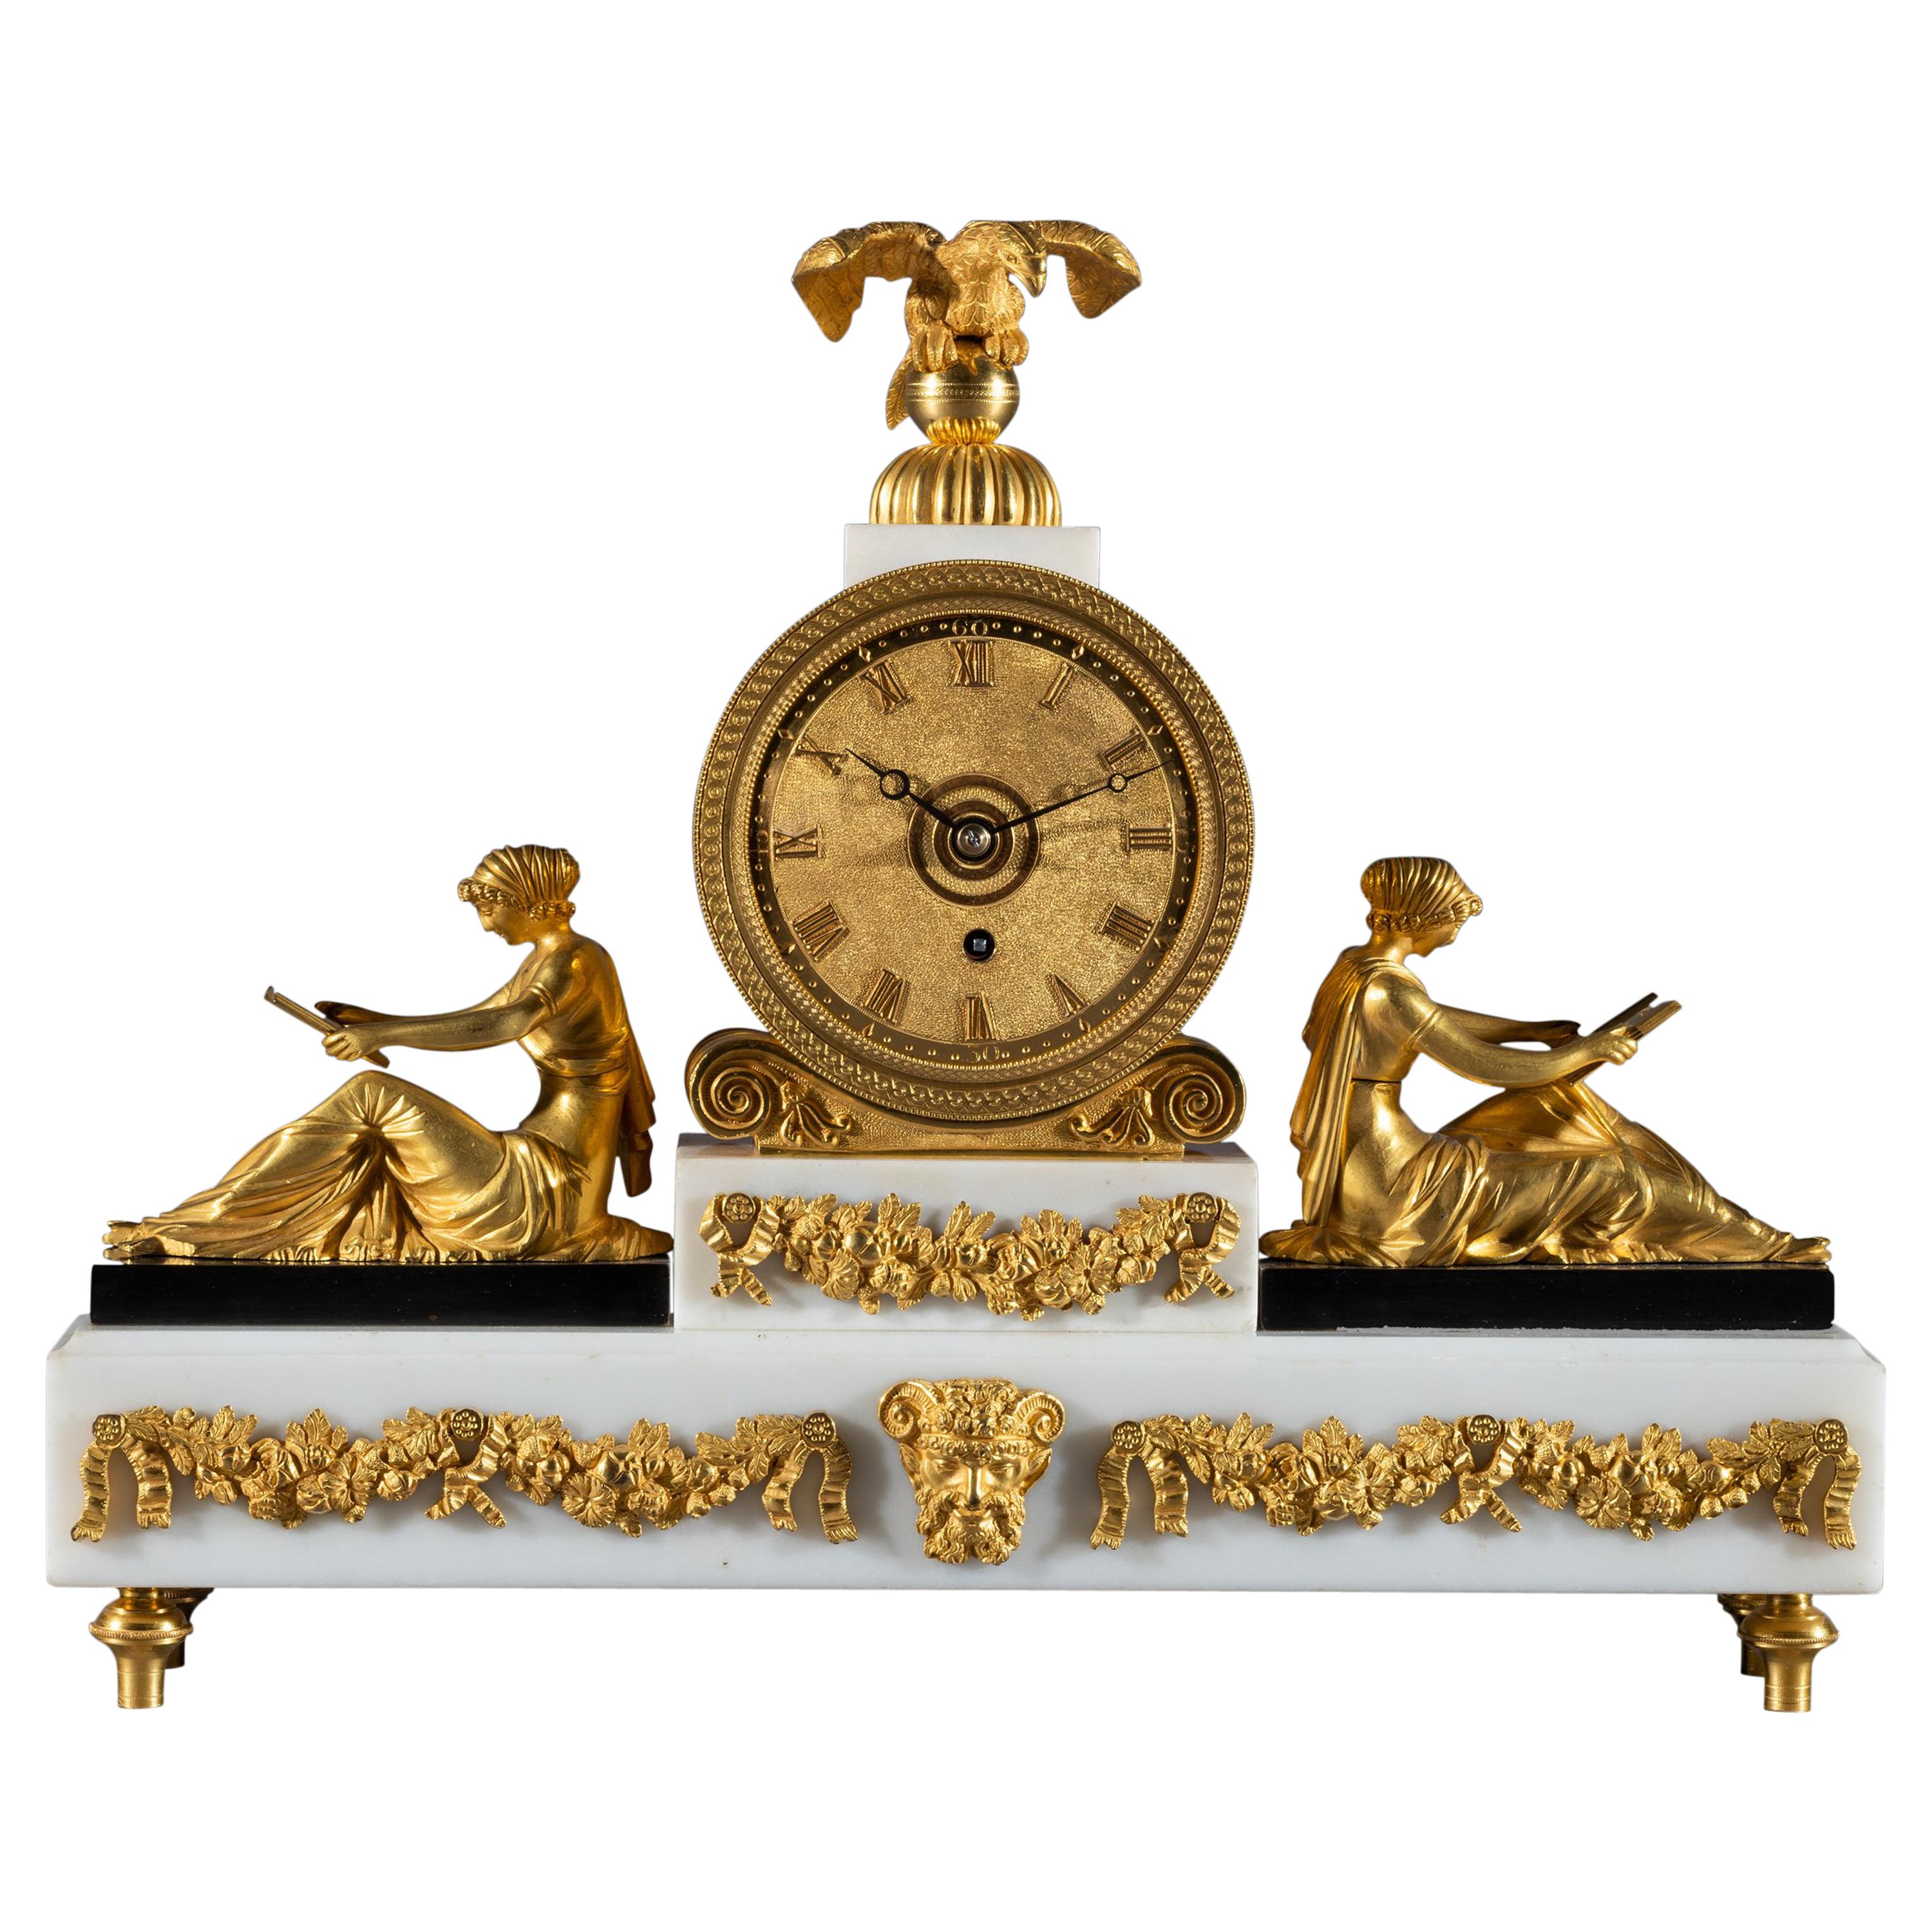 Regency Period White Marble and Gilt Bronze Mantel Timepiece the Superb English For Sale